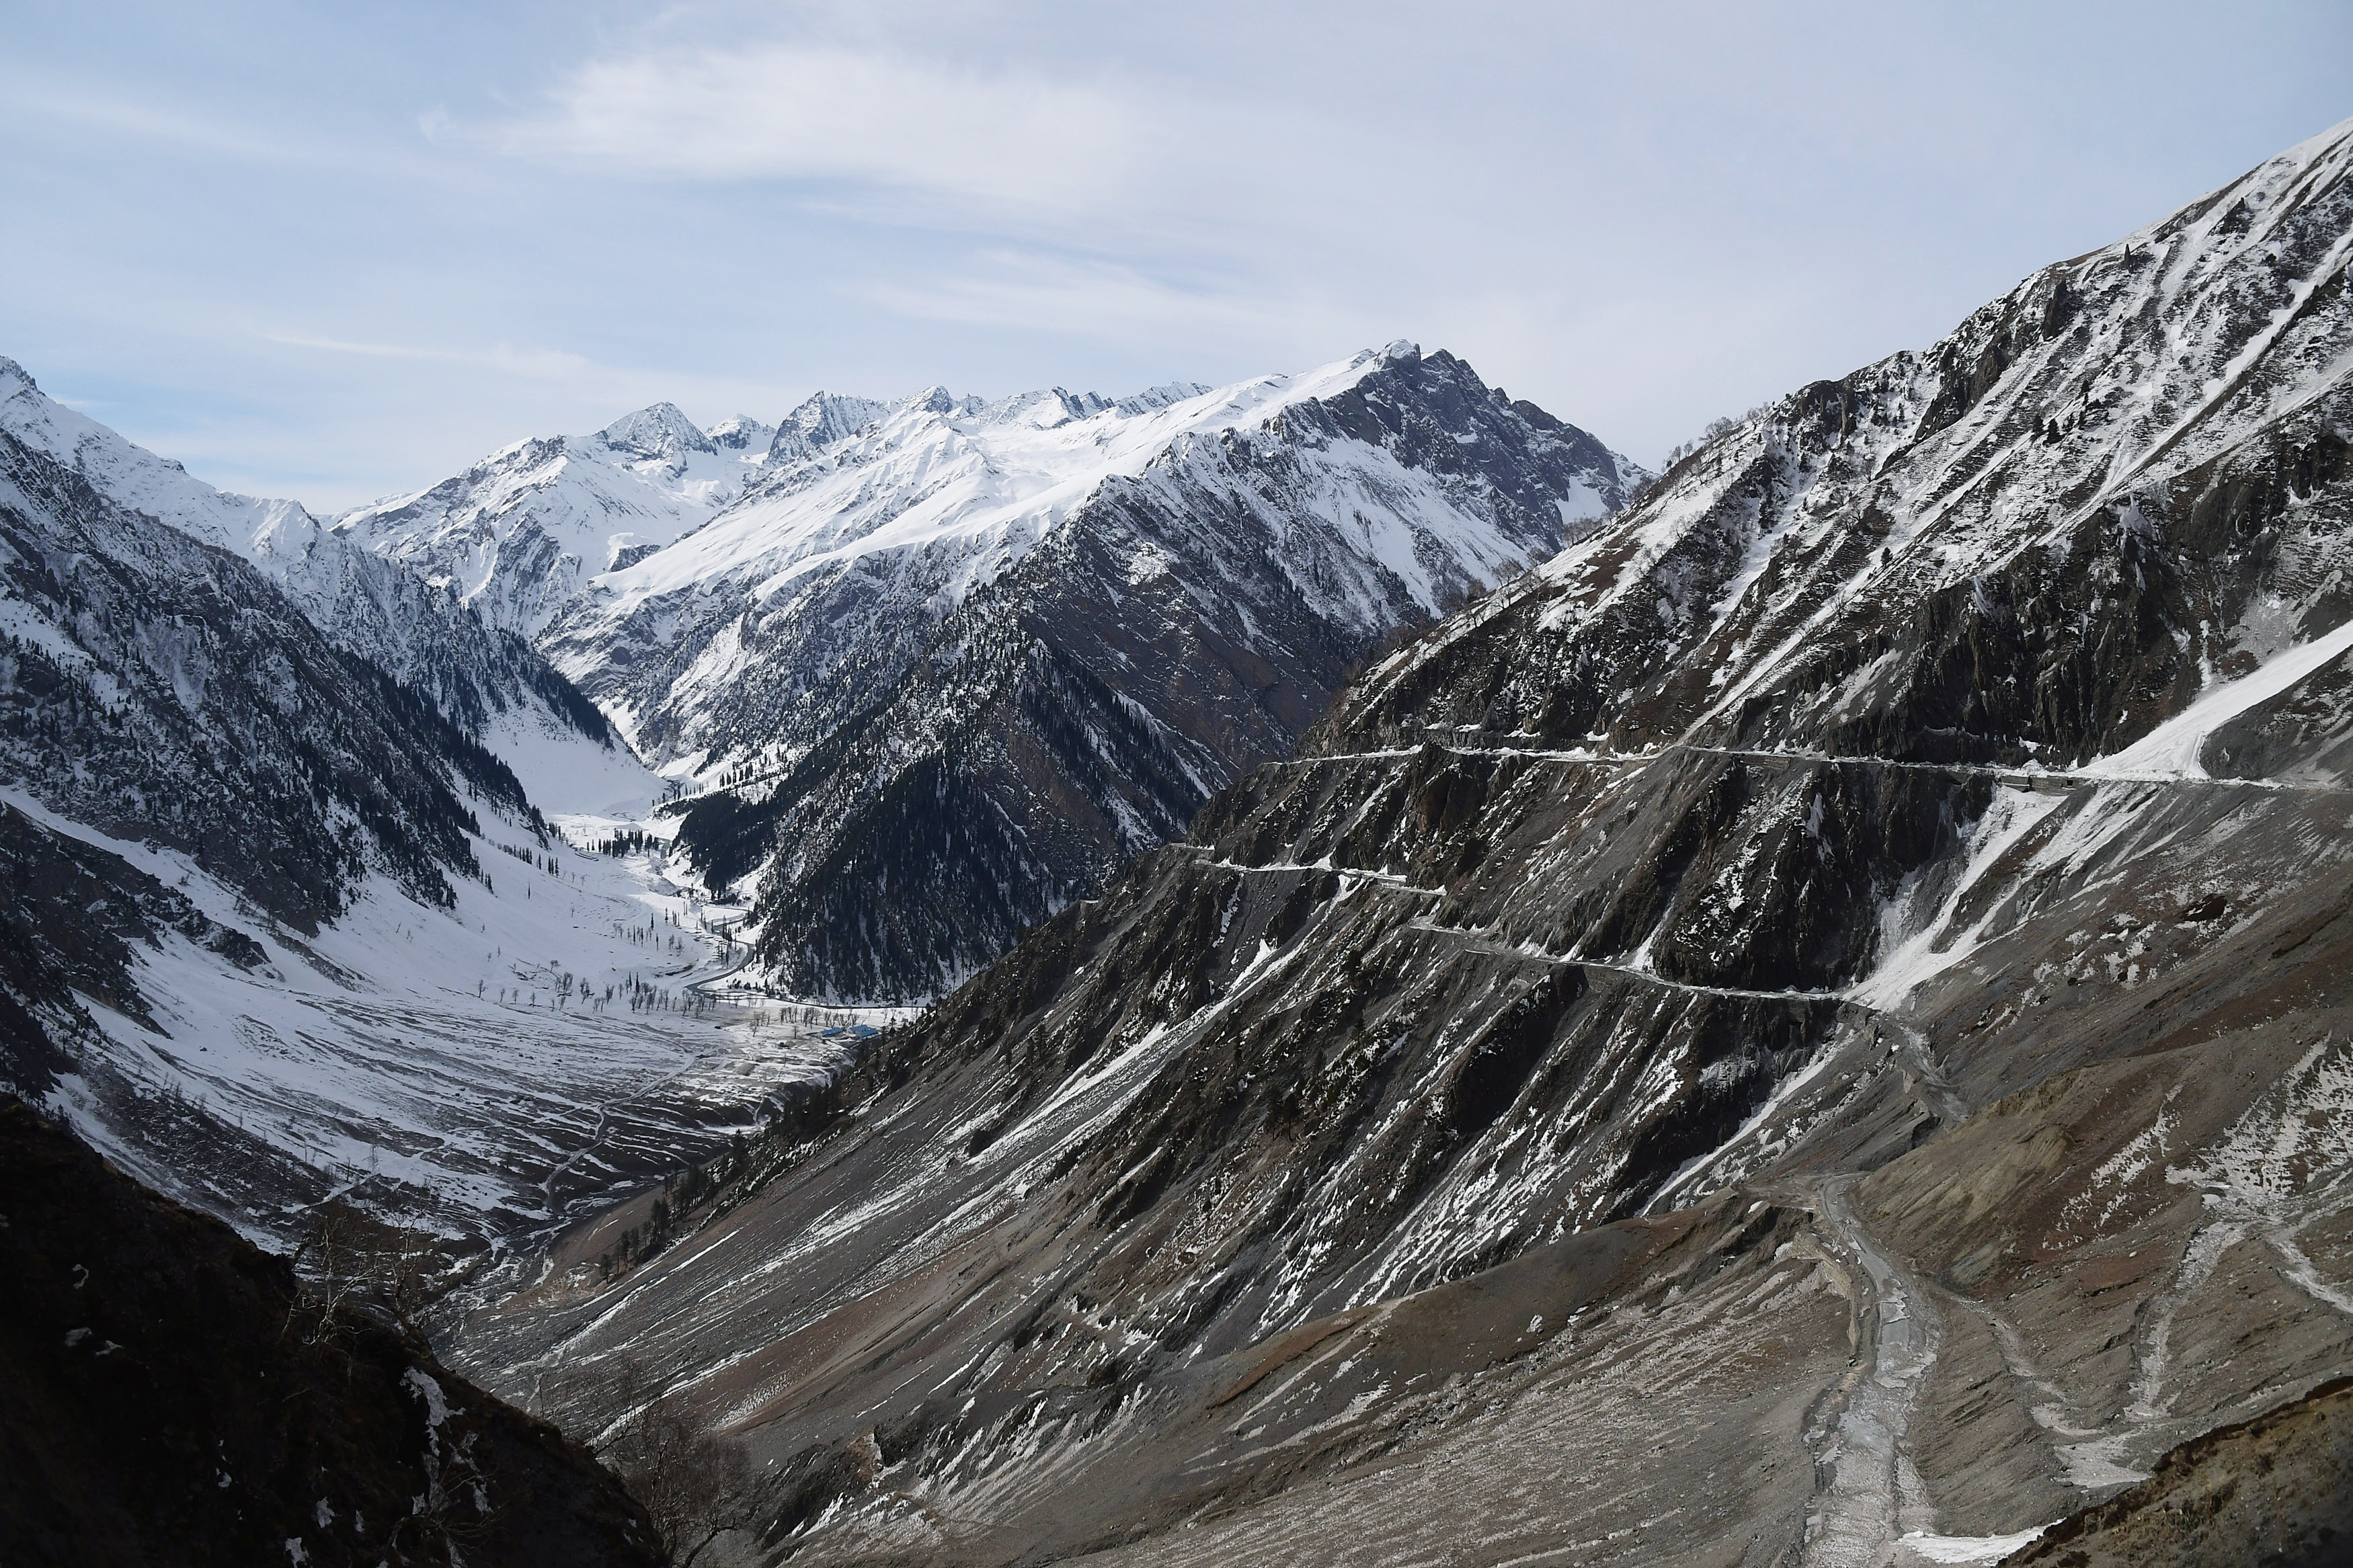 Snow-covered mountains on the Srinagar-Leh Highway